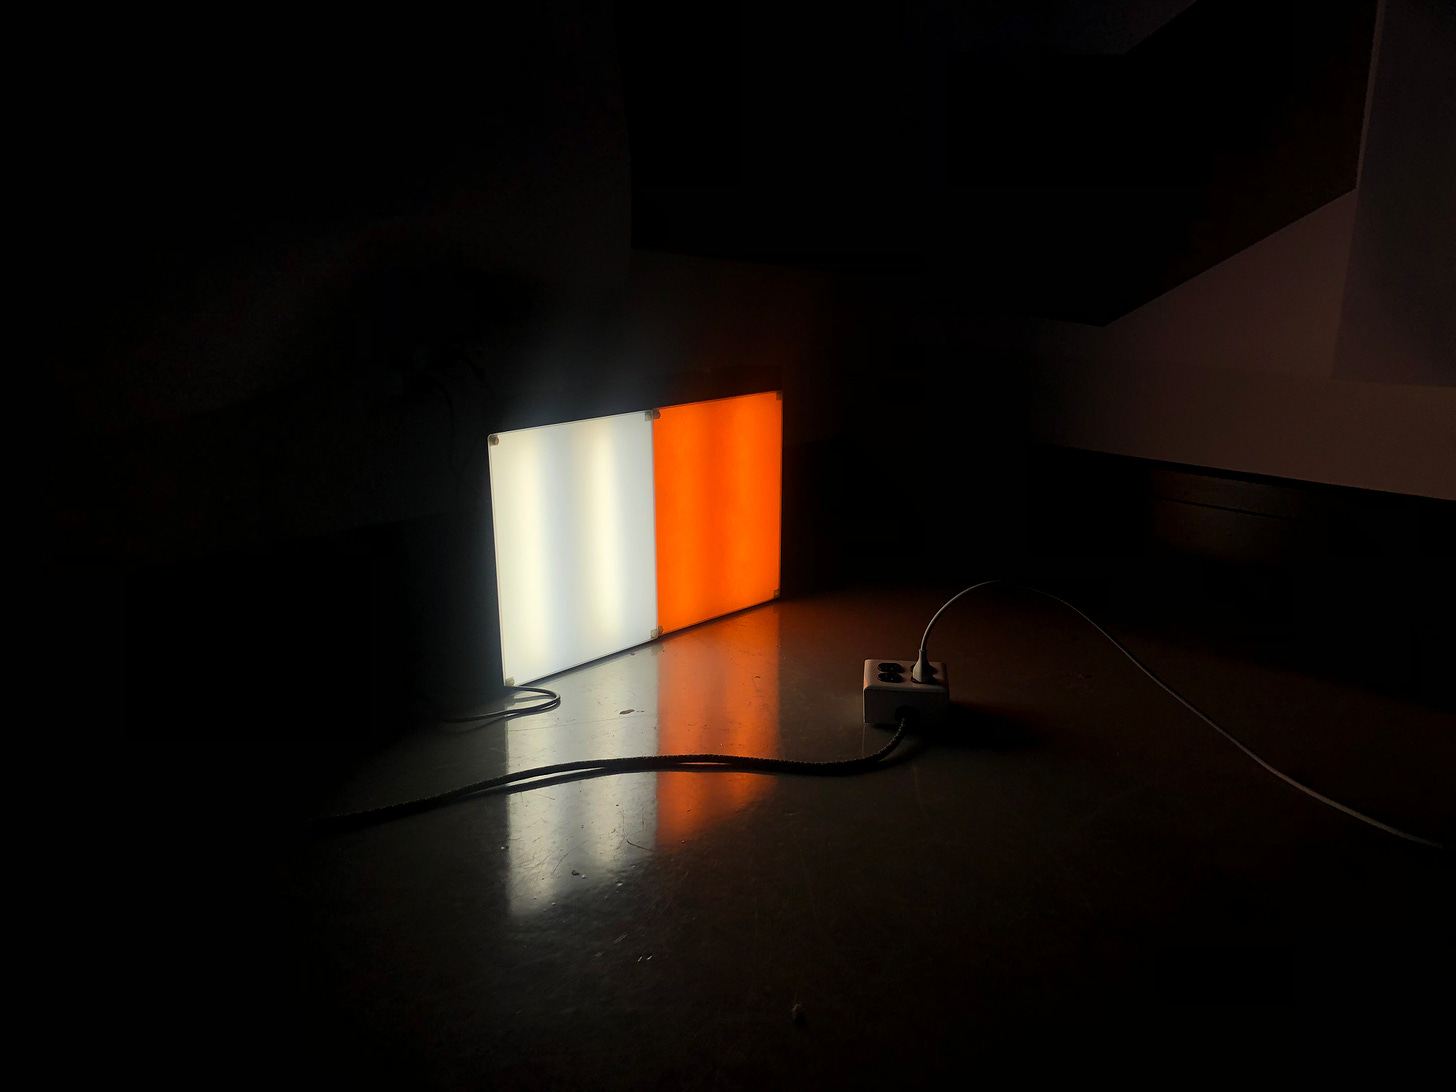 An image depicts two light boxes side by side in a dark room. The leftmost light is cool and white. The rightmost light is orange and warm.